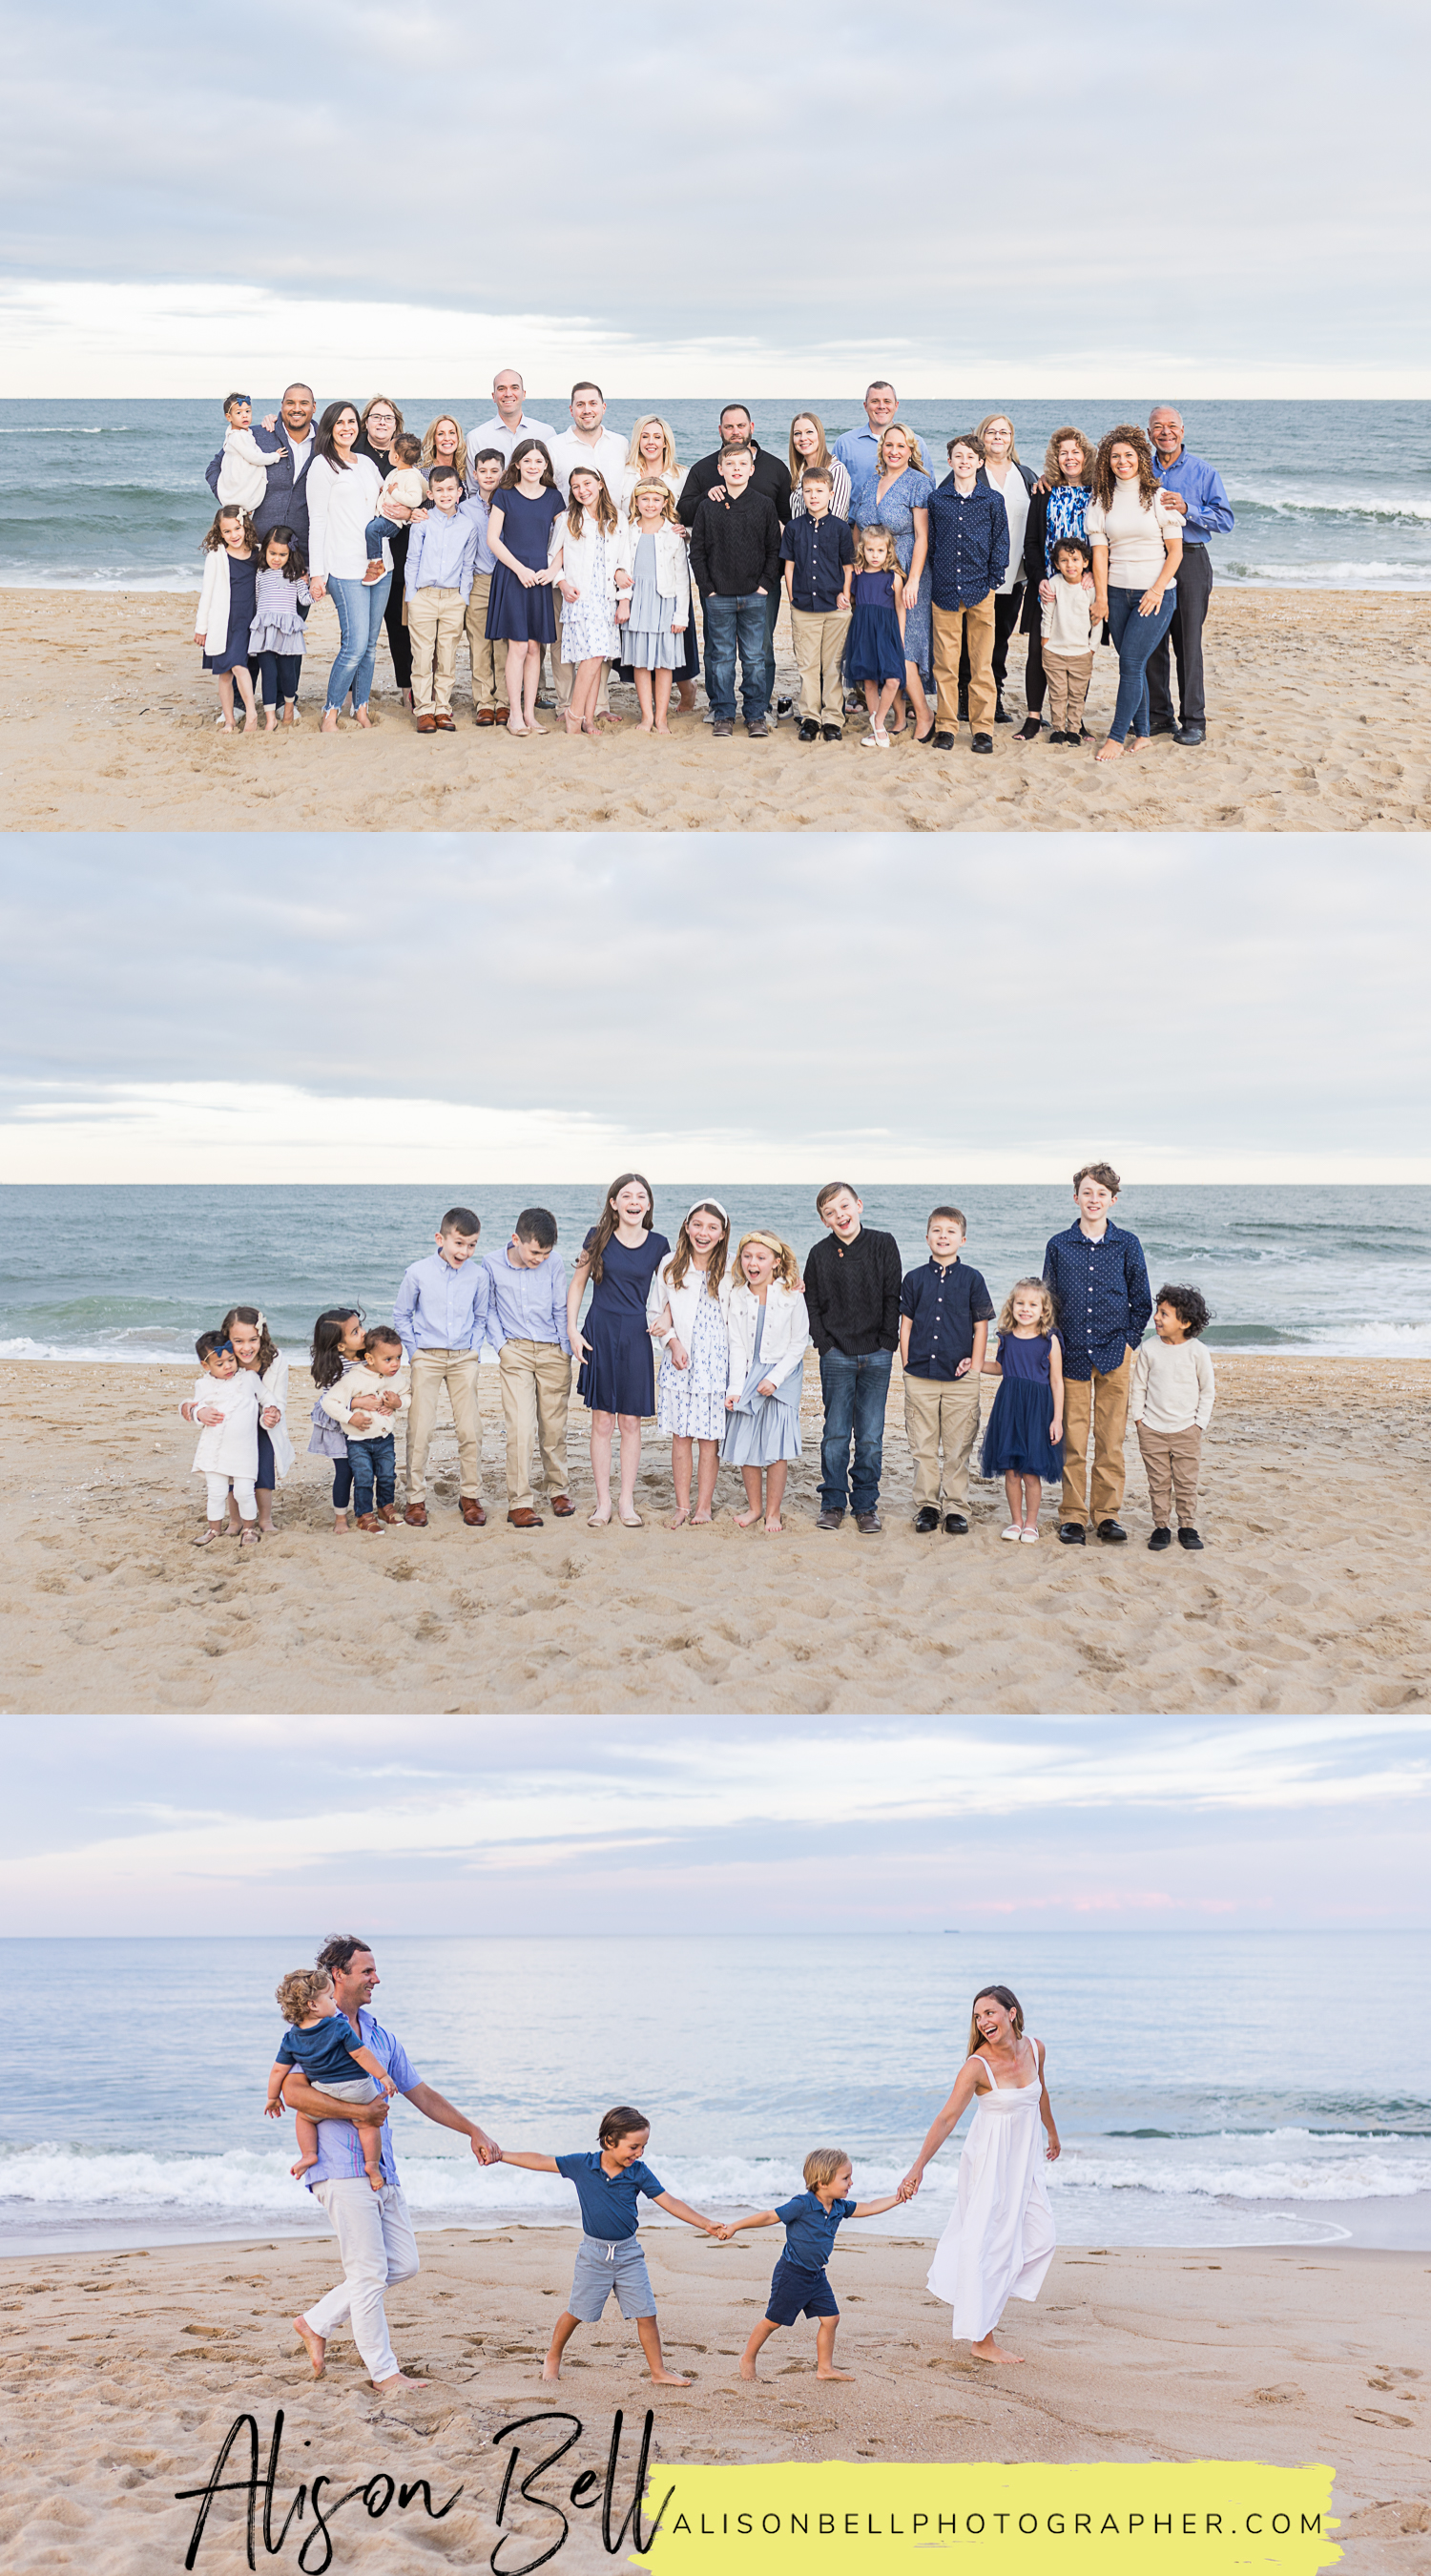 Extended family photo session on the beach by Alison Bell, Photographer